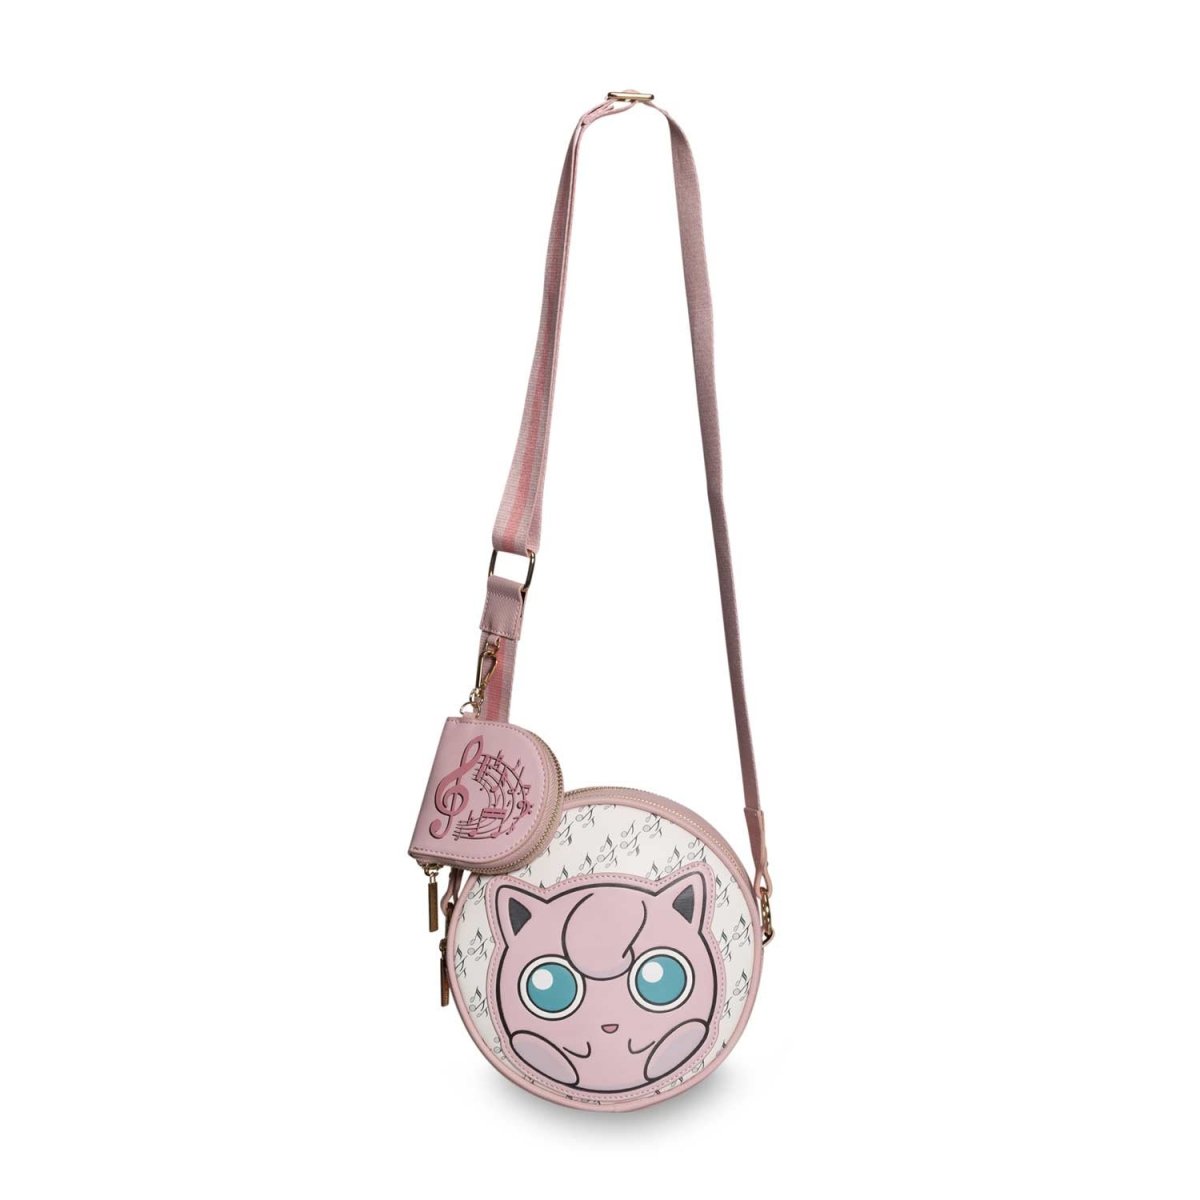 New Danielle Nicole The Child Pram Bag Is the Cutest in the Parsec! -  Fashion -